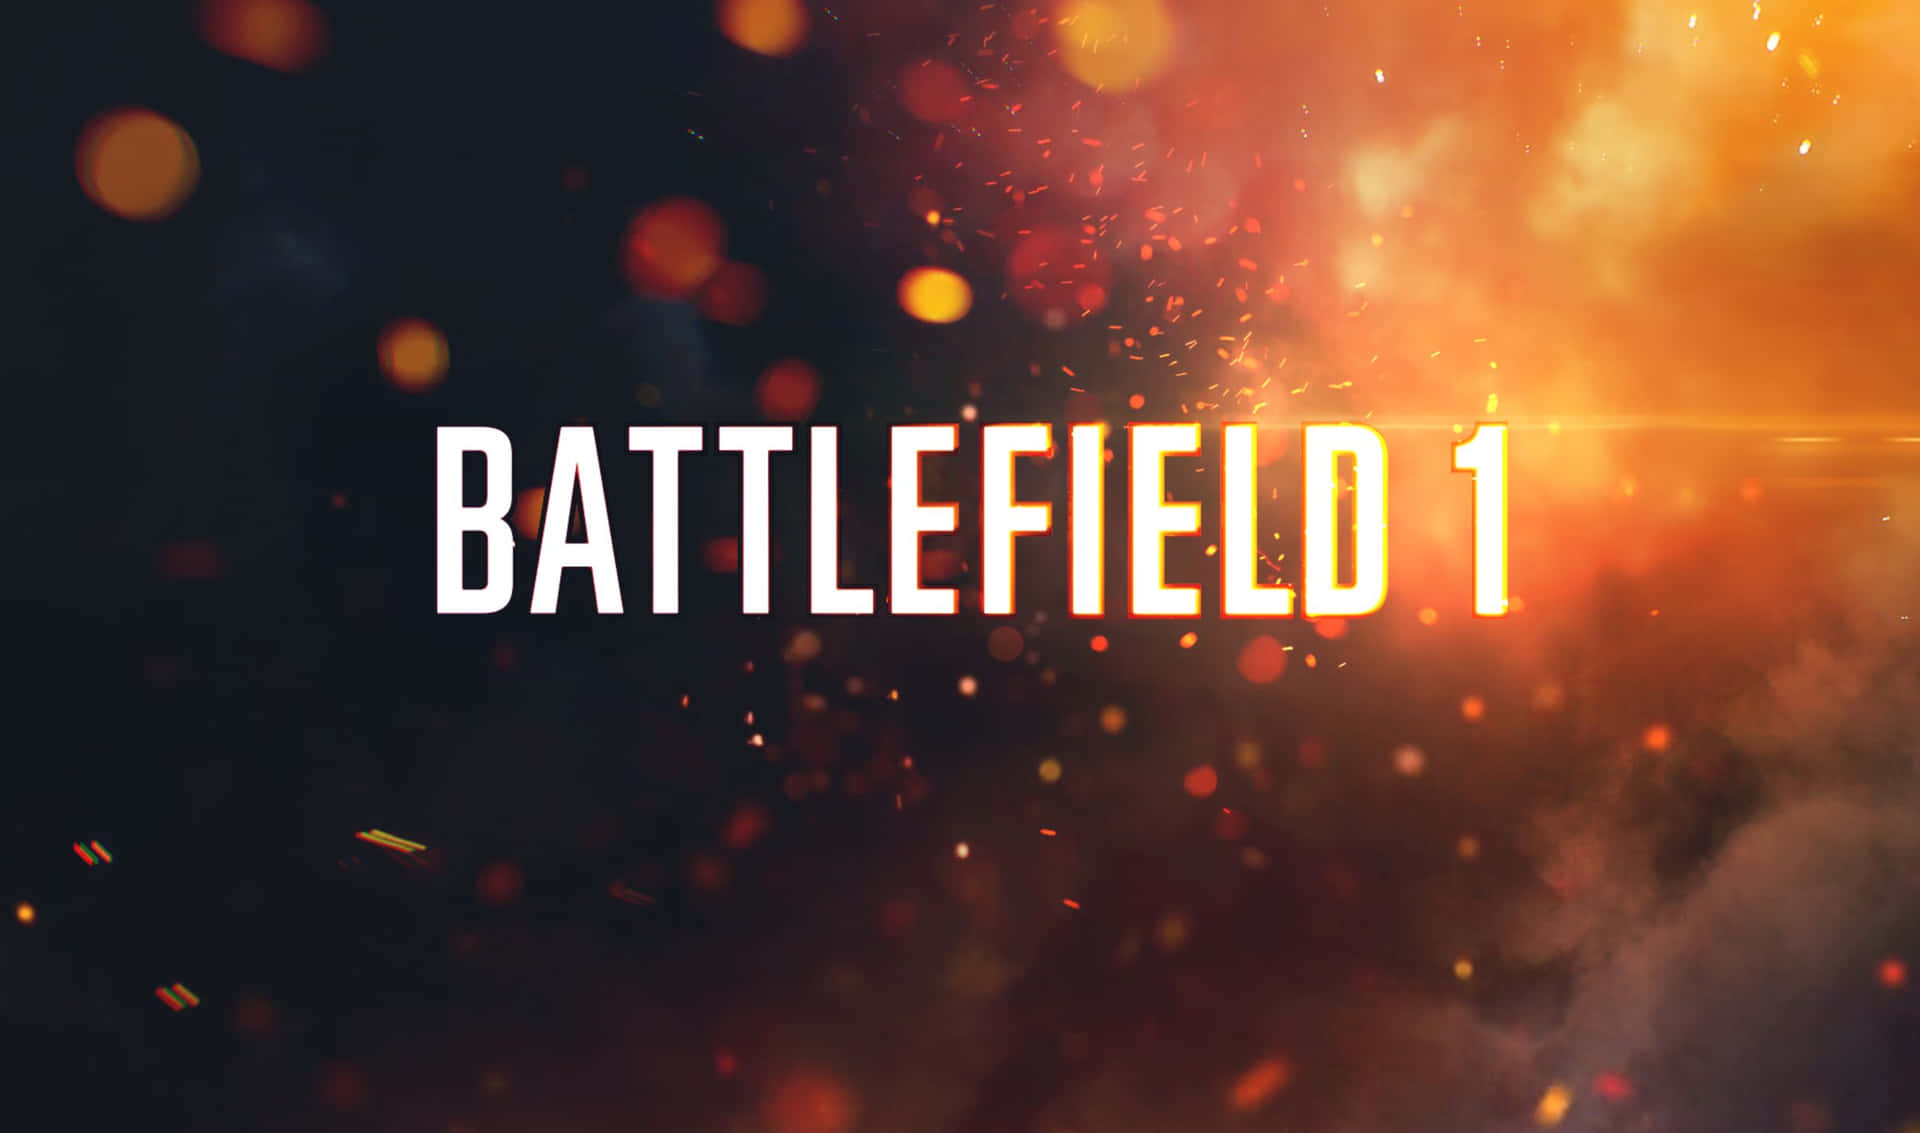 Image  Battlefield 1 - Epic Firefights Await in the Trenches